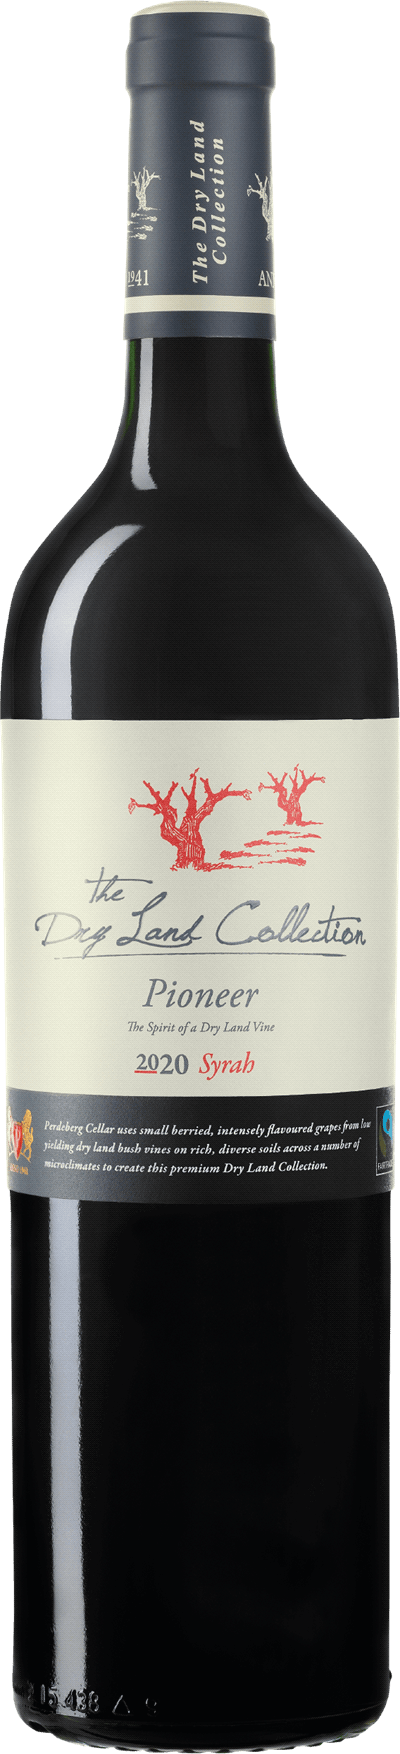 Perdeberg Cellar The Dry Land Collection Pioneer Syrah 2020 - DinVinguide Perdeberg Cellar The Dry Land Collection Pioneer Syrah 2020